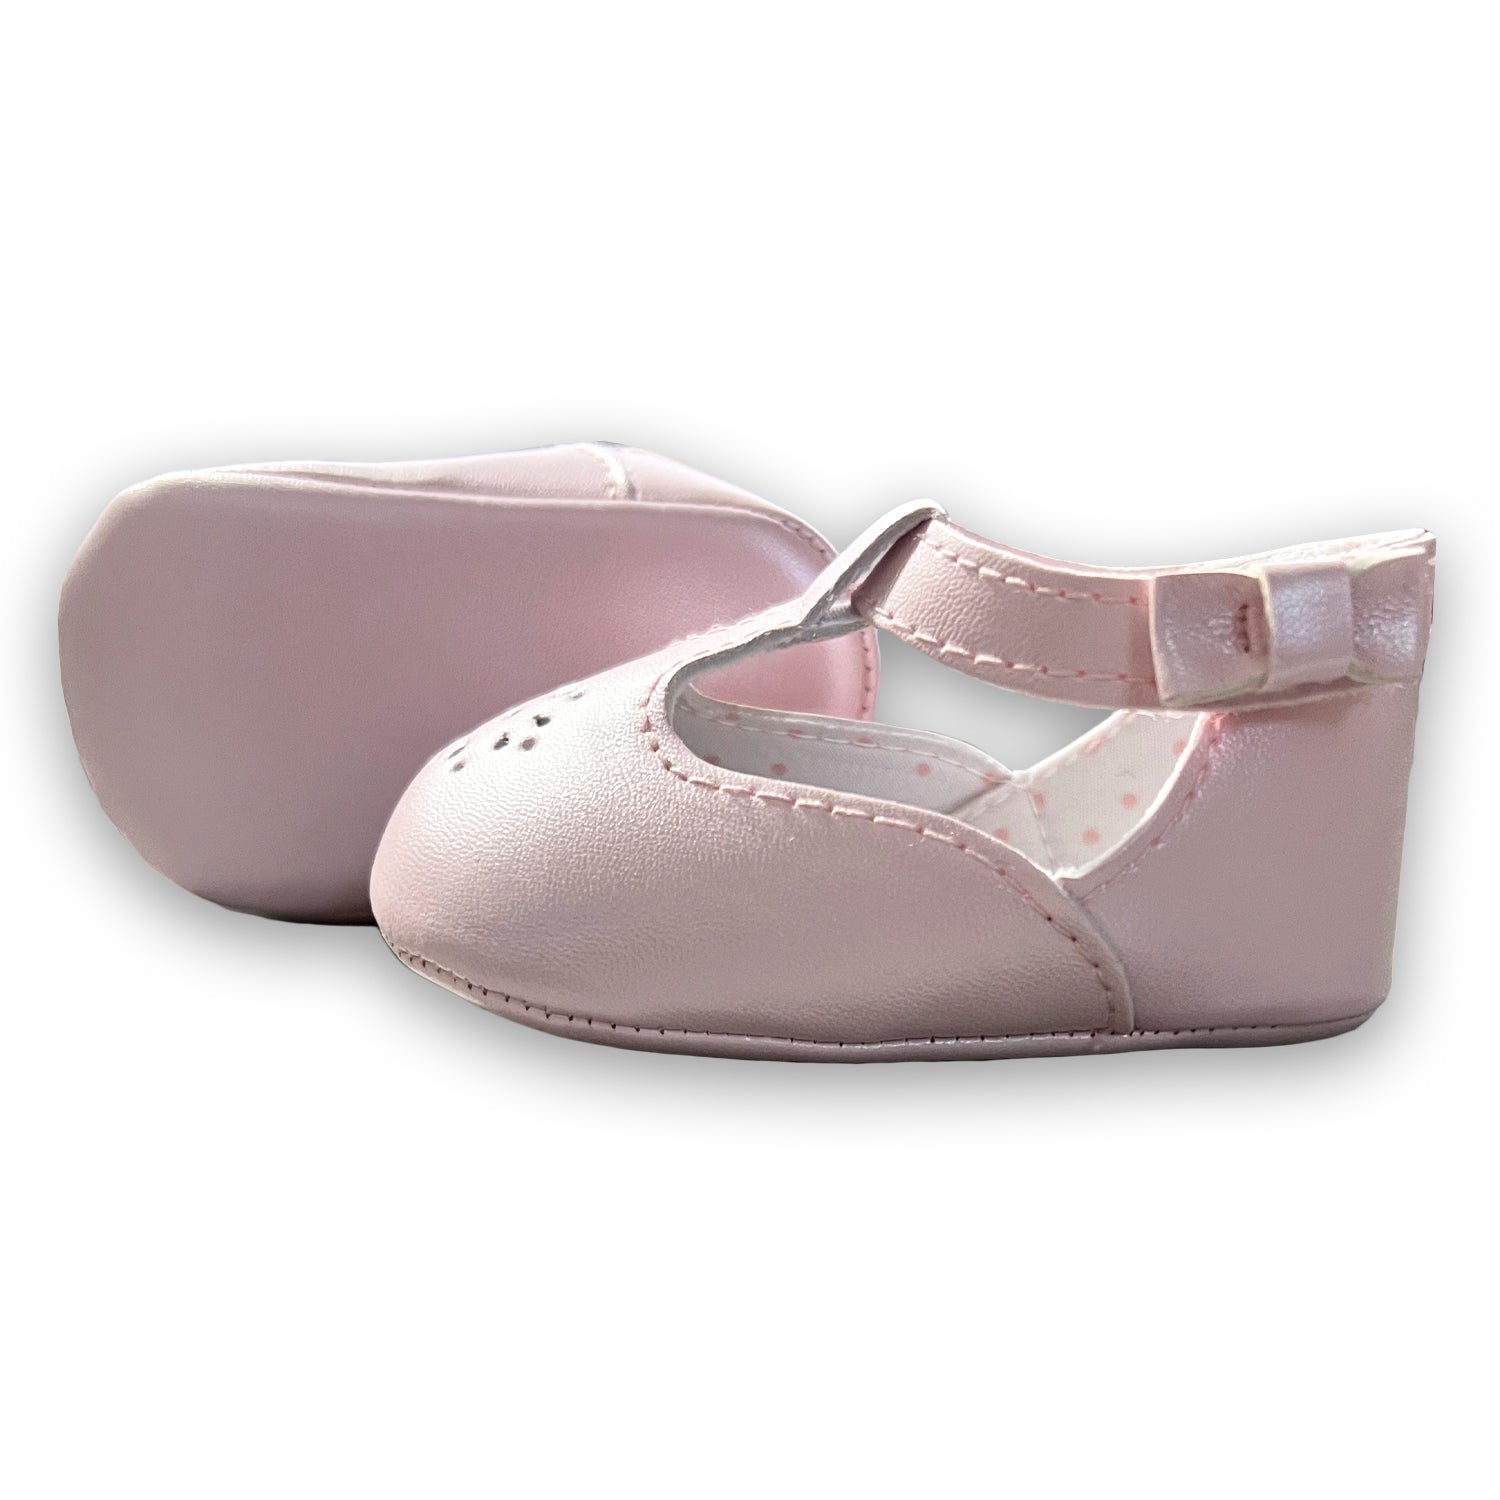 Pearlized Pink Mary Jane Pre Walker Shoes